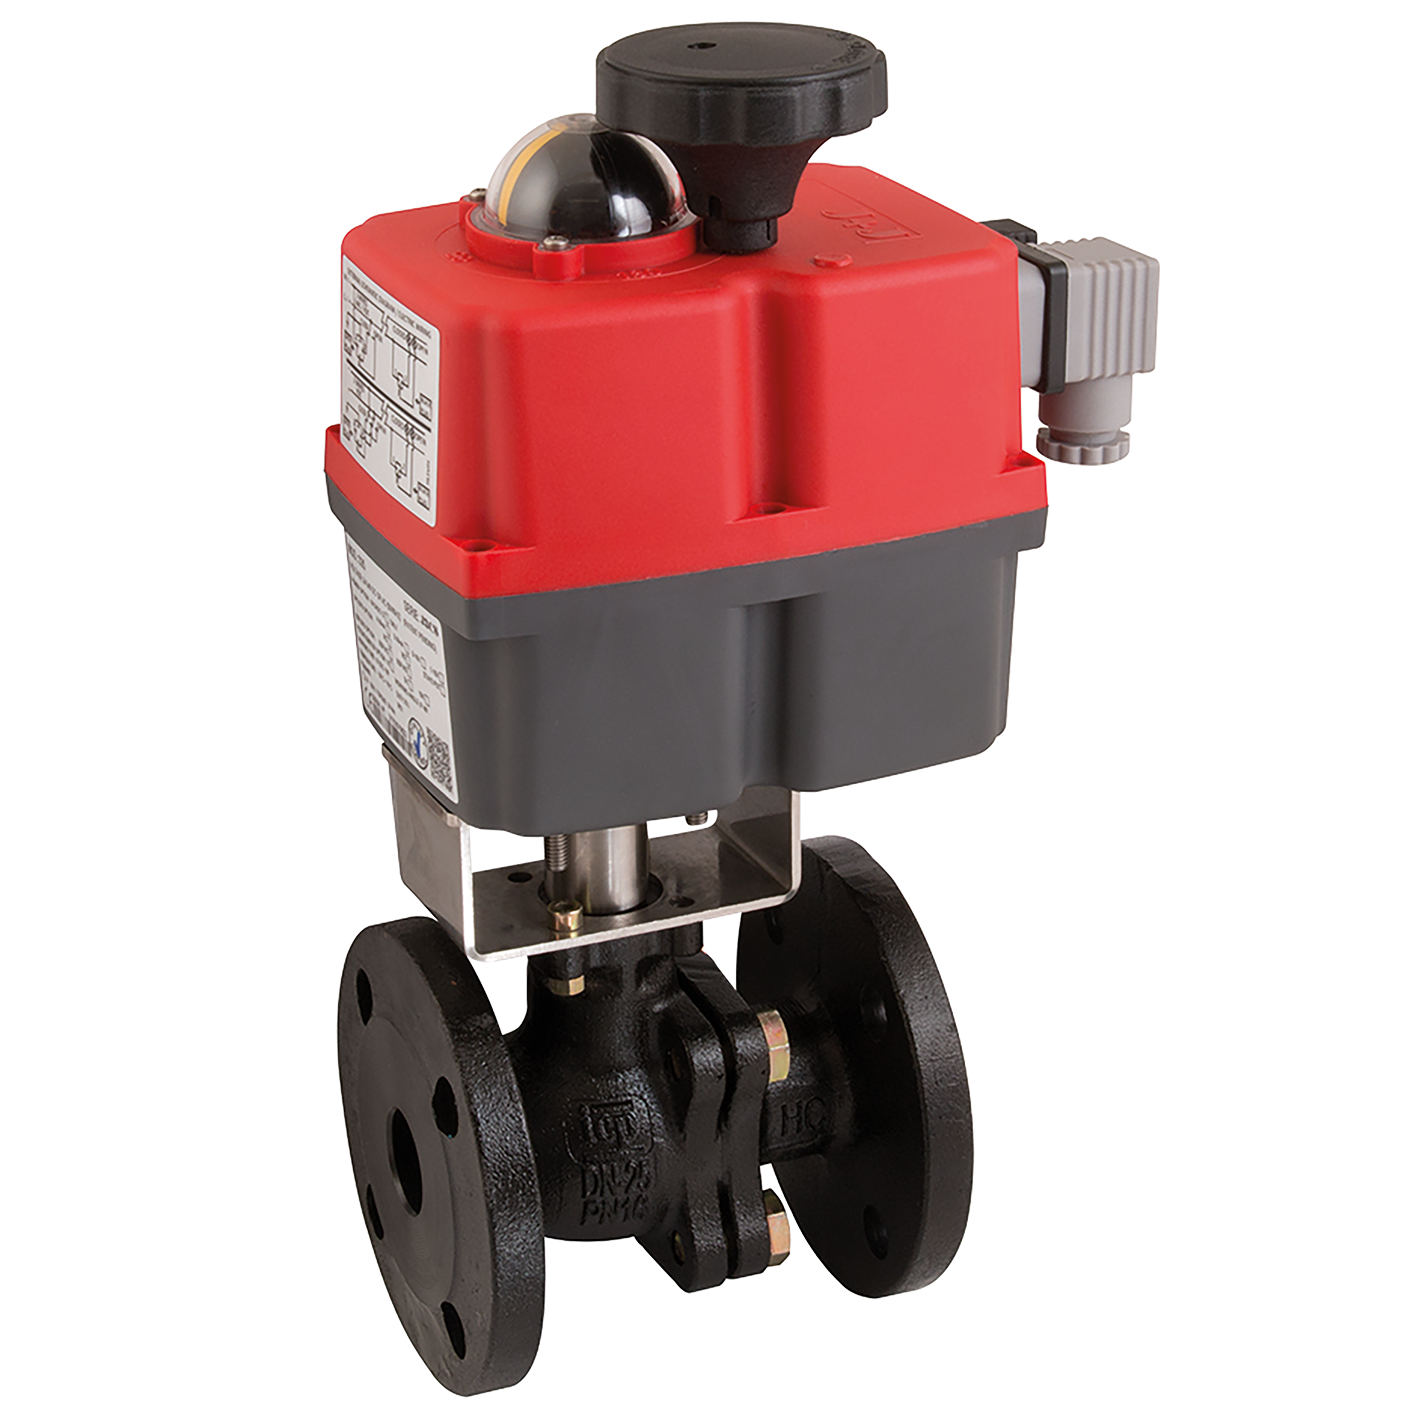 UK Suppliers of Electric Actuated Cast Iron Ball Valve